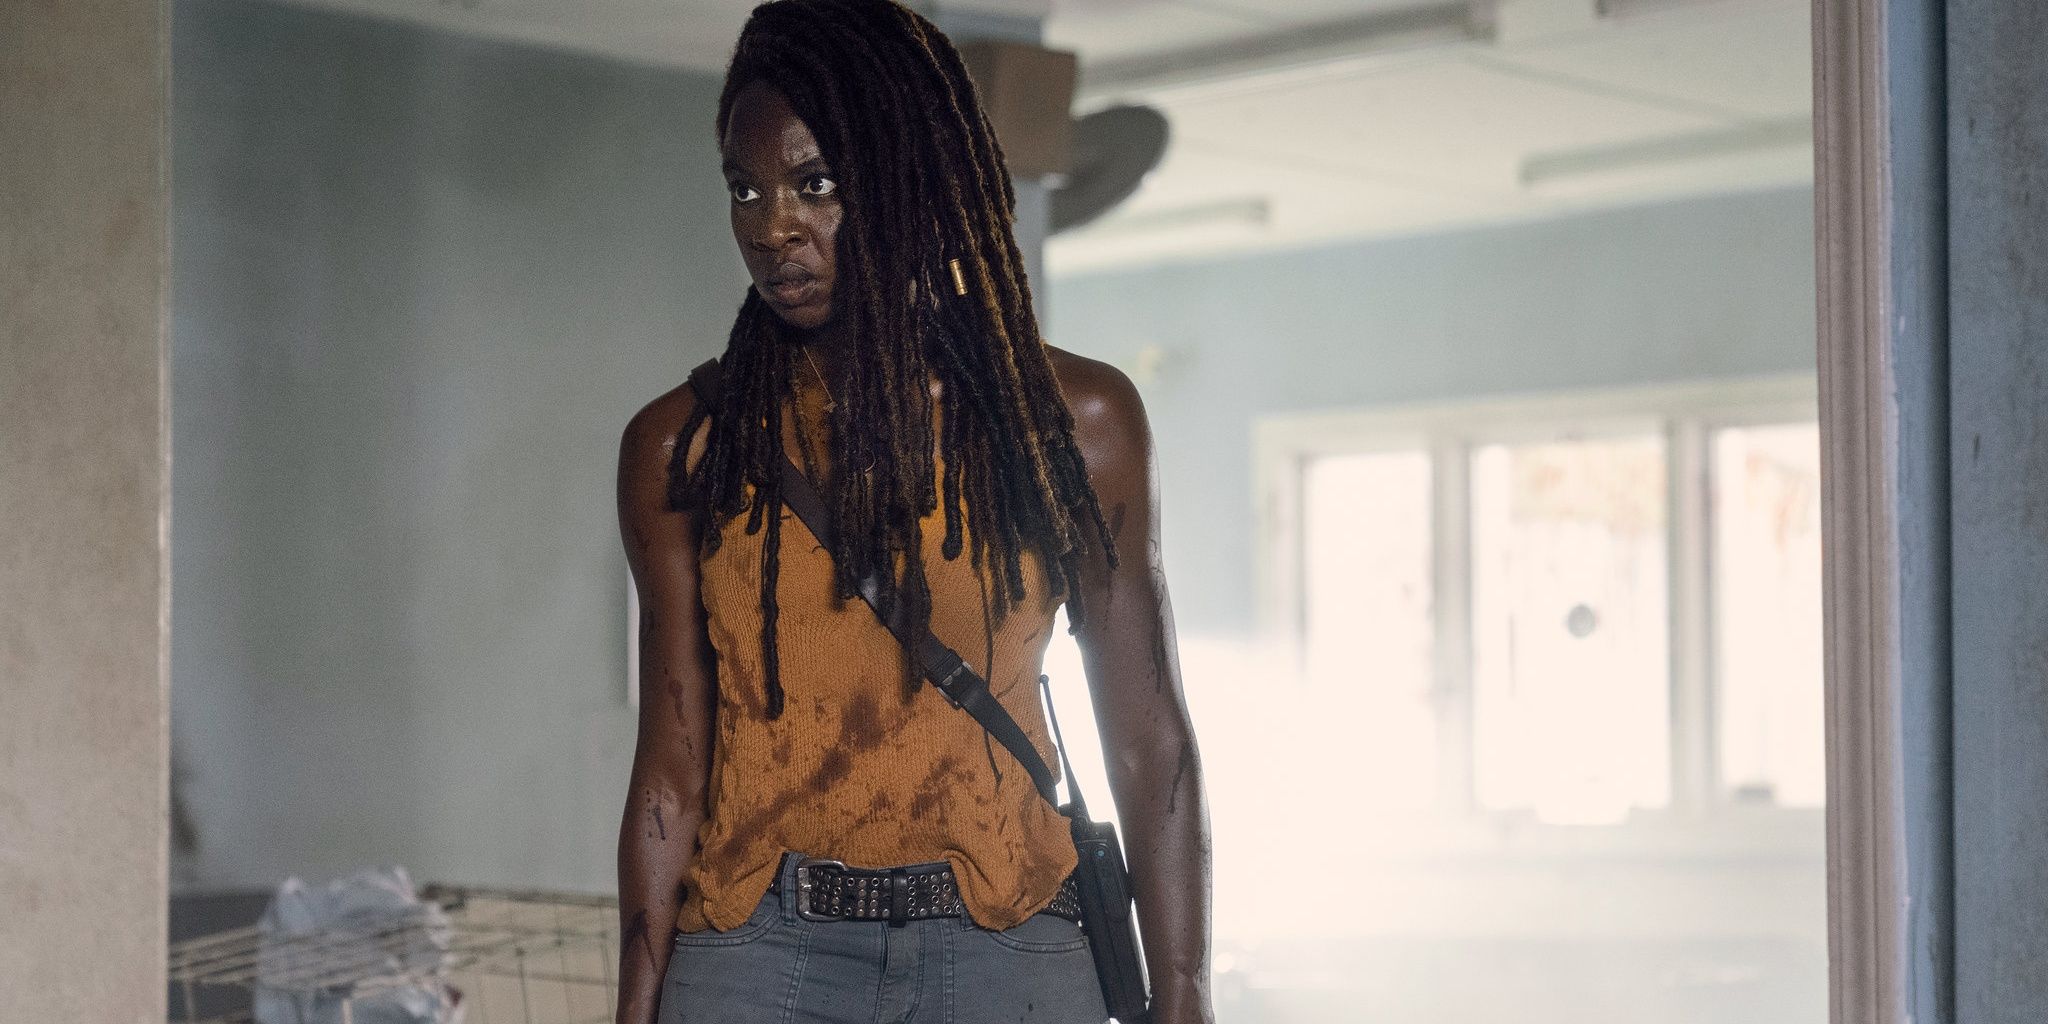 TWD's Michonne standing in a room with a determined expression on her face